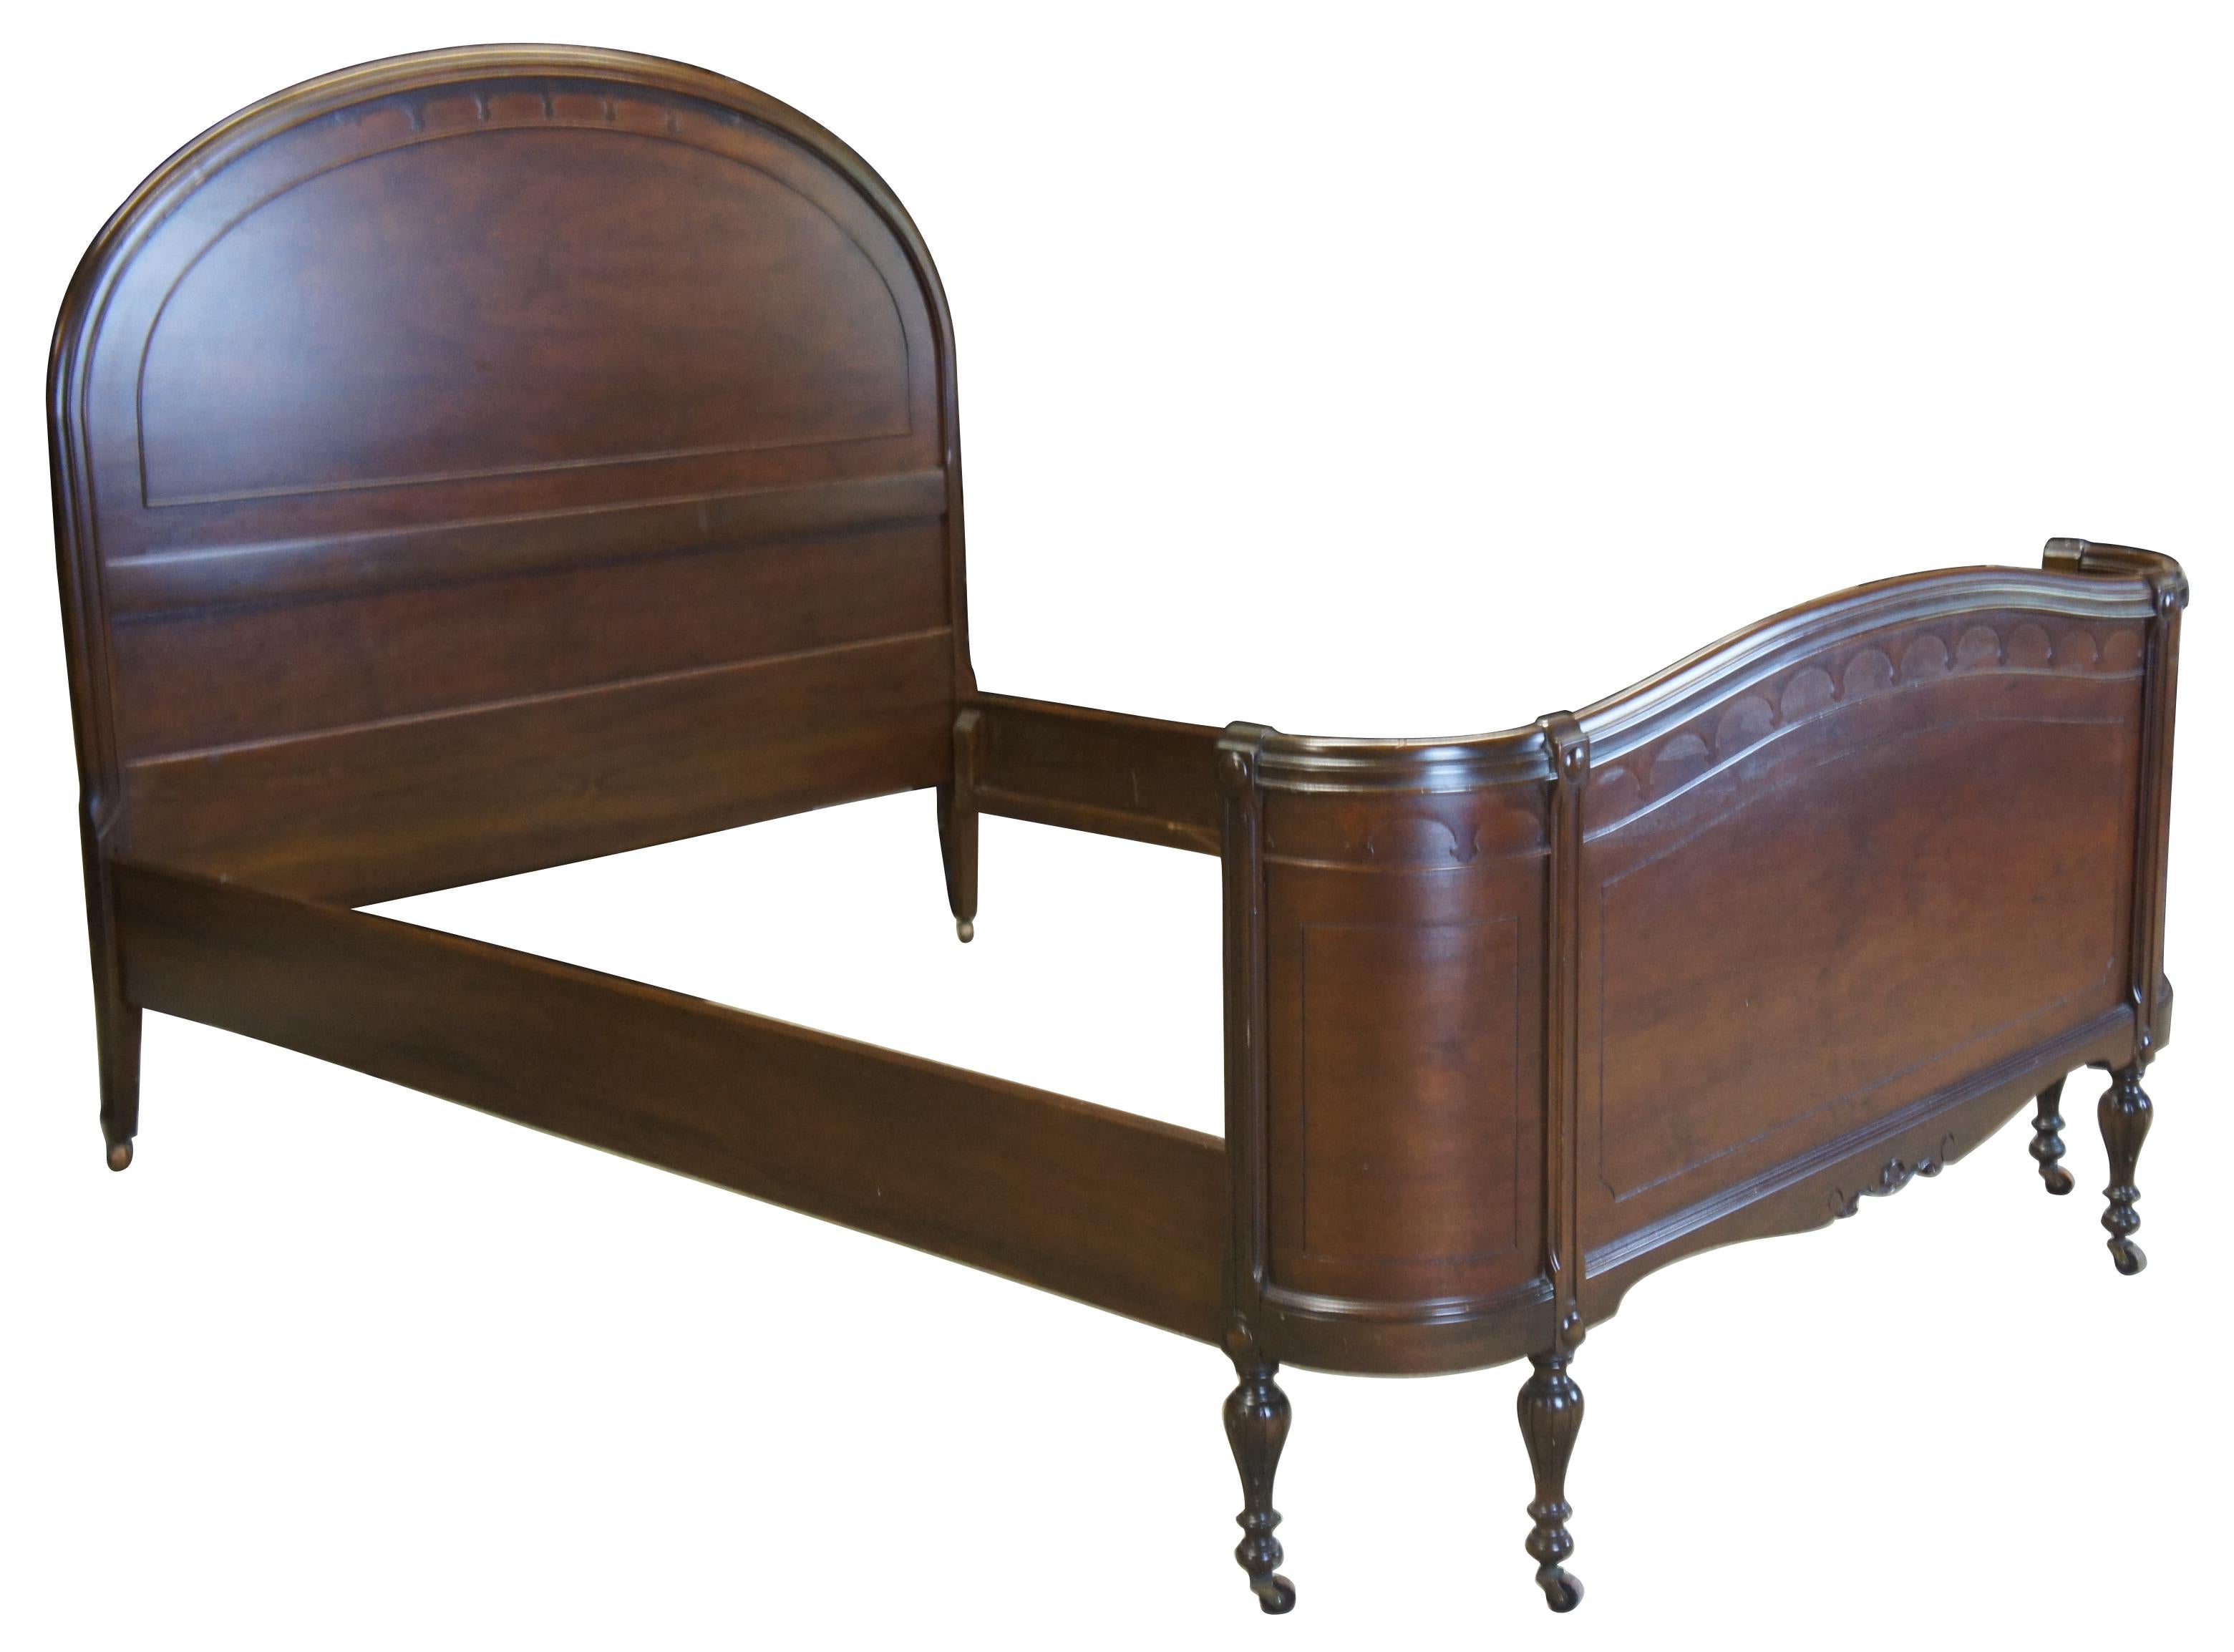 Antique late Victorian full size curved walnut bed

Turn of the century curved walnut bed frame with dome back headboard. Features unique raised arcade with burled accents along the front and back.

Measures: 57